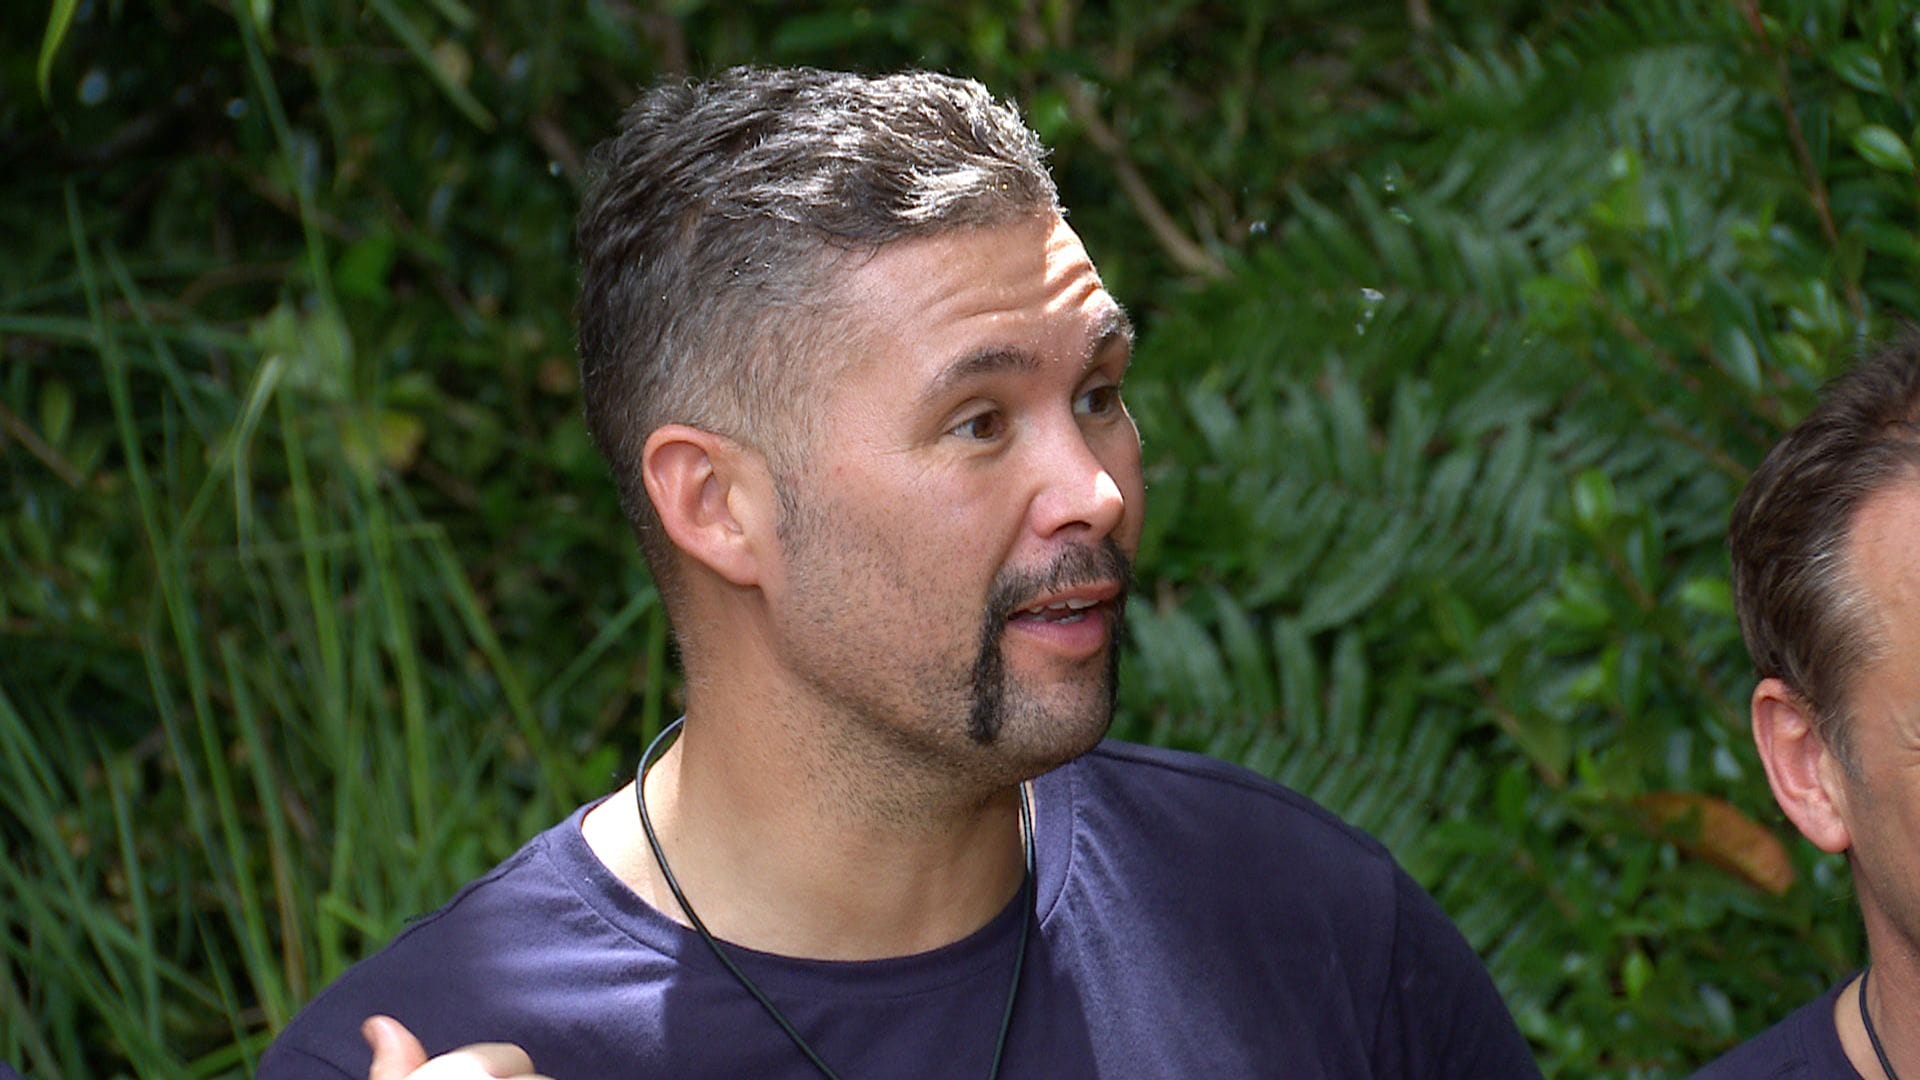 Tony Bellew's feud with I'm A Celeb campmate intensifies as he threatens to 'kick his a***'